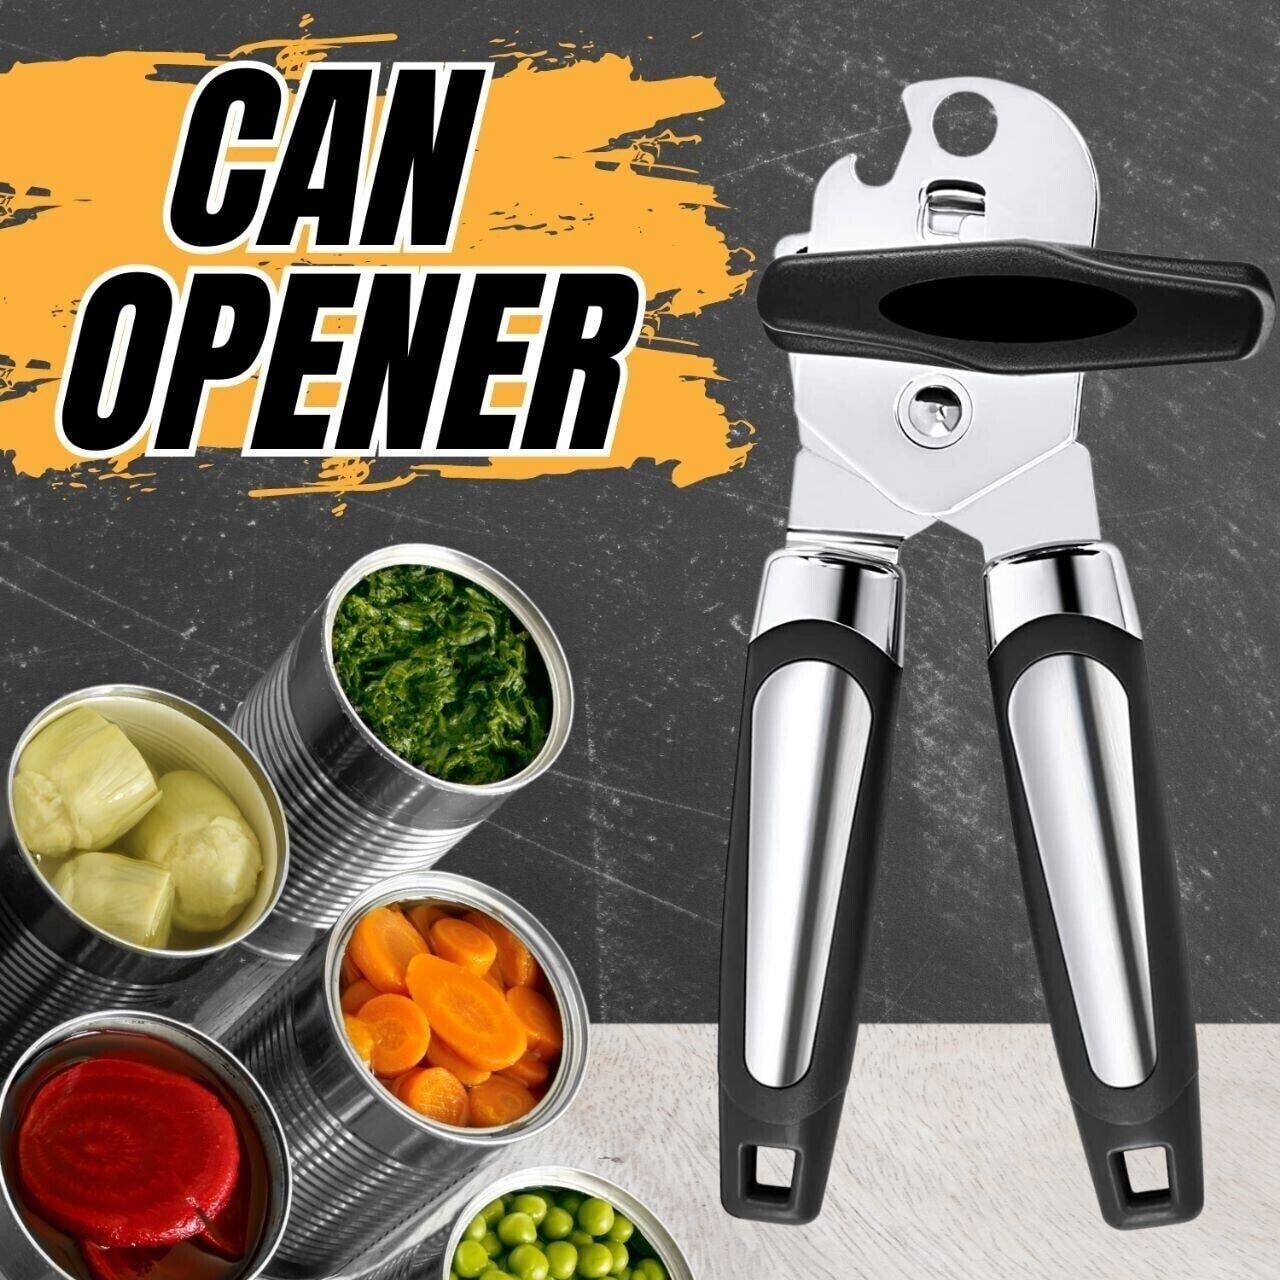 https://ak1.ostkcdn.com/images/products/is/images/direct/19943fbb8cdd4987b910601d78d8300cd9590349/Heavy-Duty-Stainless-Steel-Can-Opener.jpg